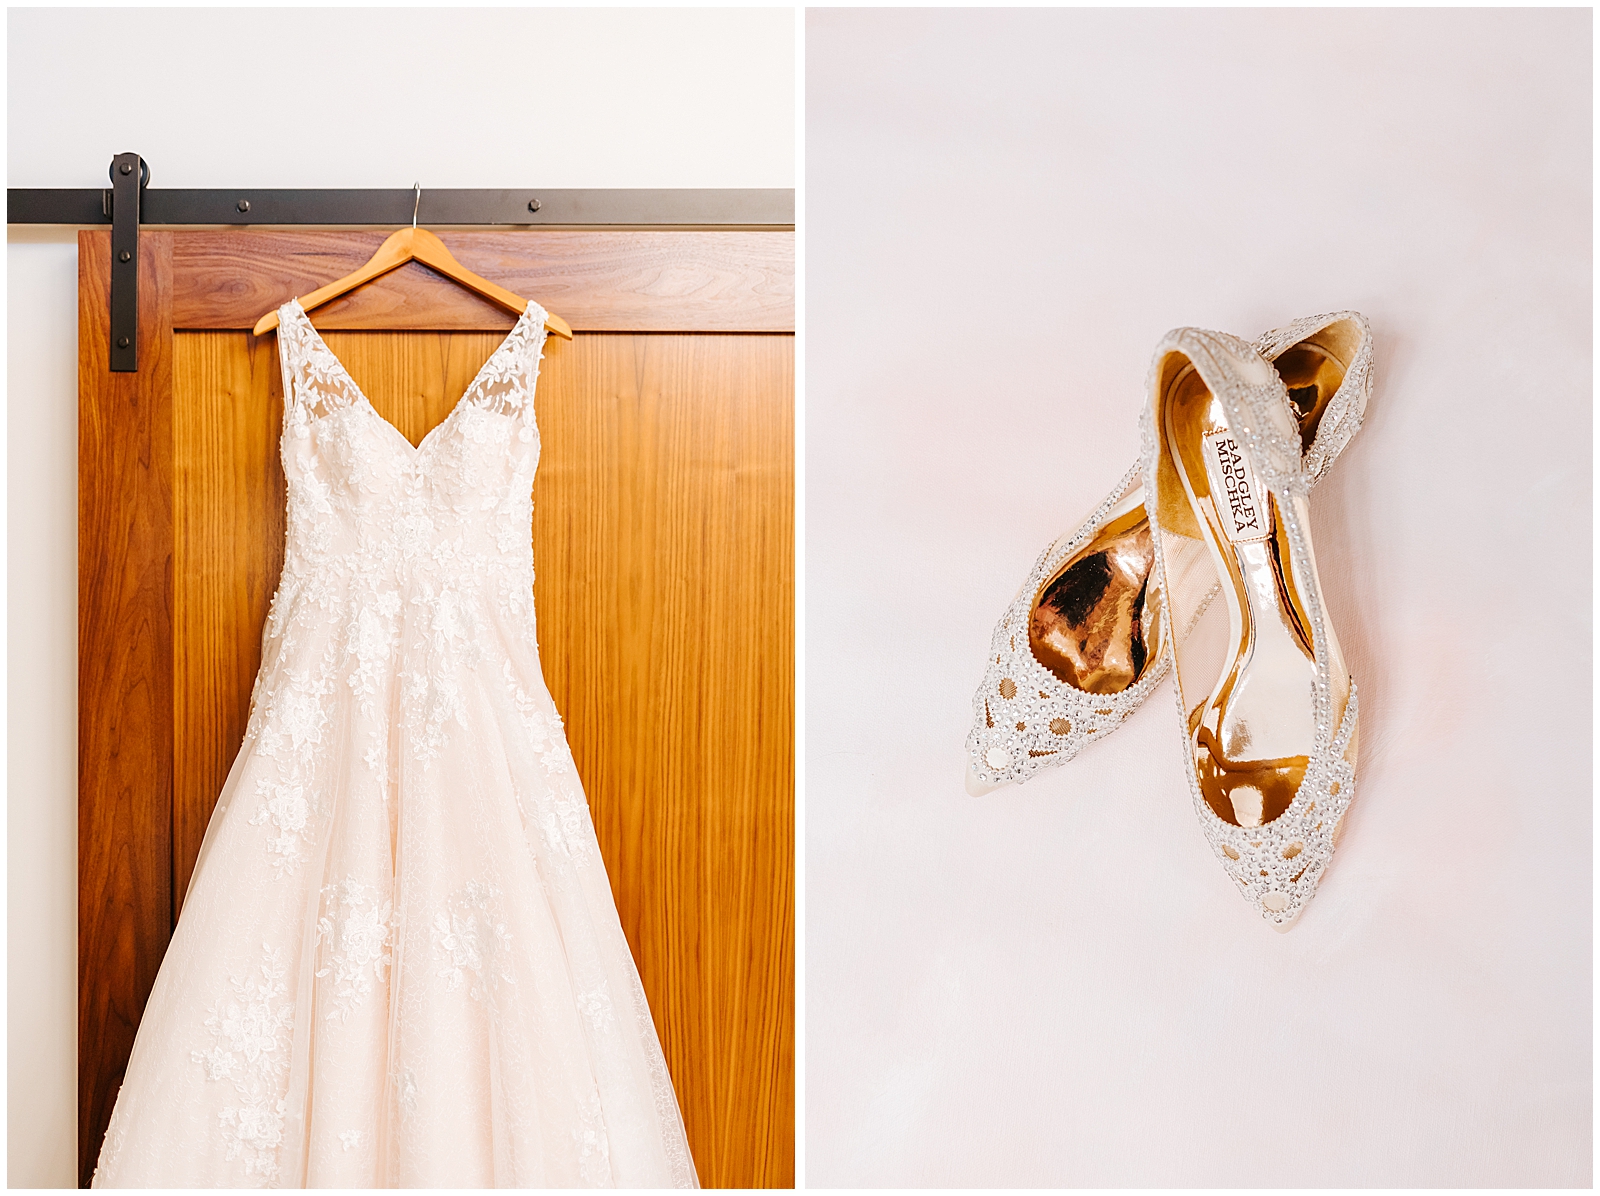 Maggie Sottero dress and badgley mischka wedding shoes